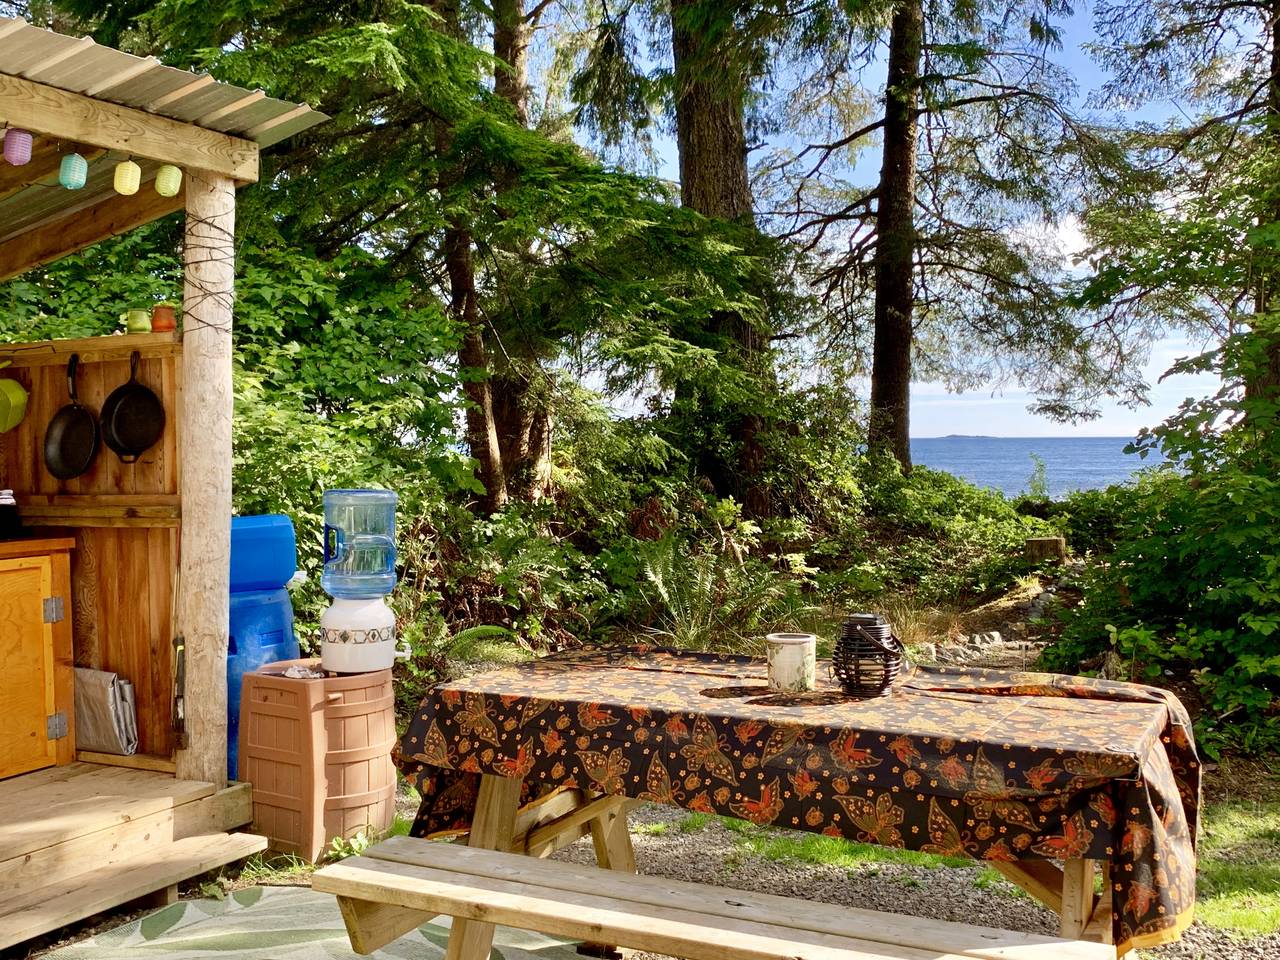 Ocean view from your porch.